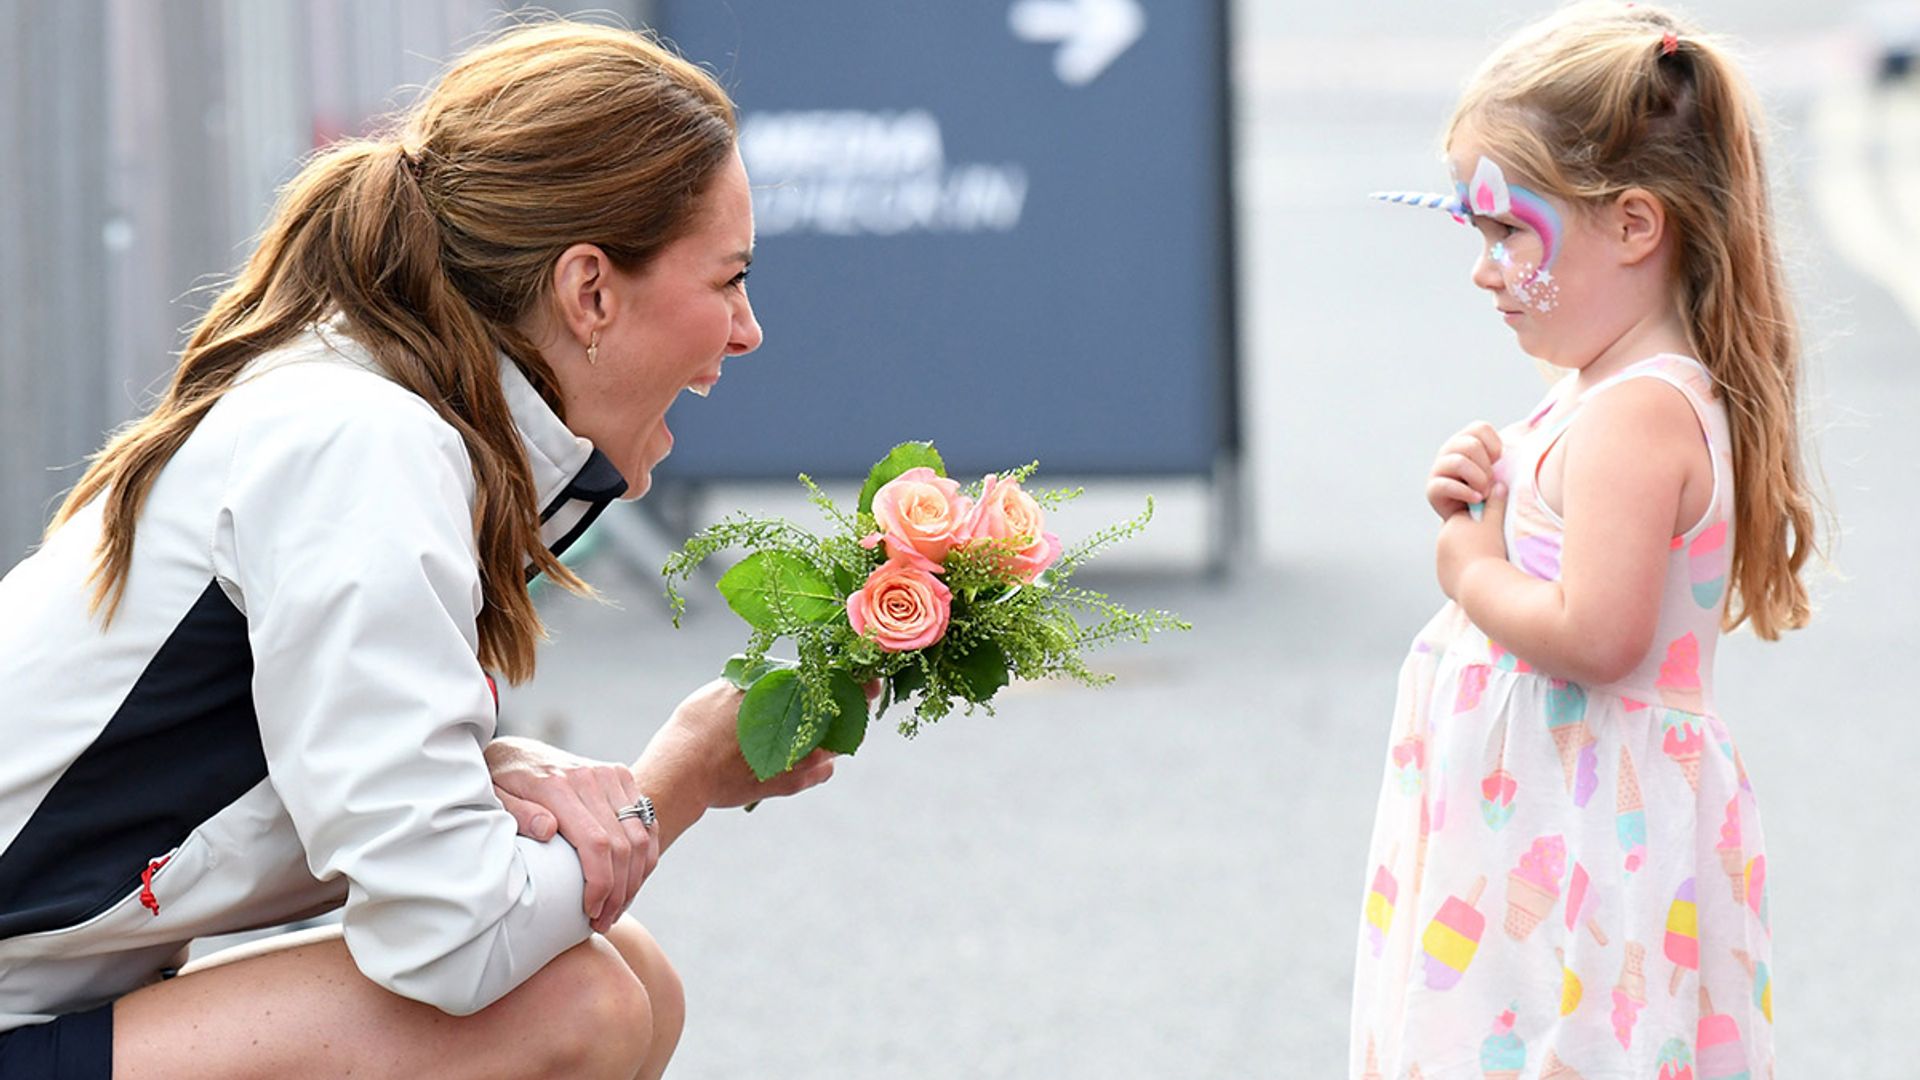 kate middleton meets young girl at kings cup regatta